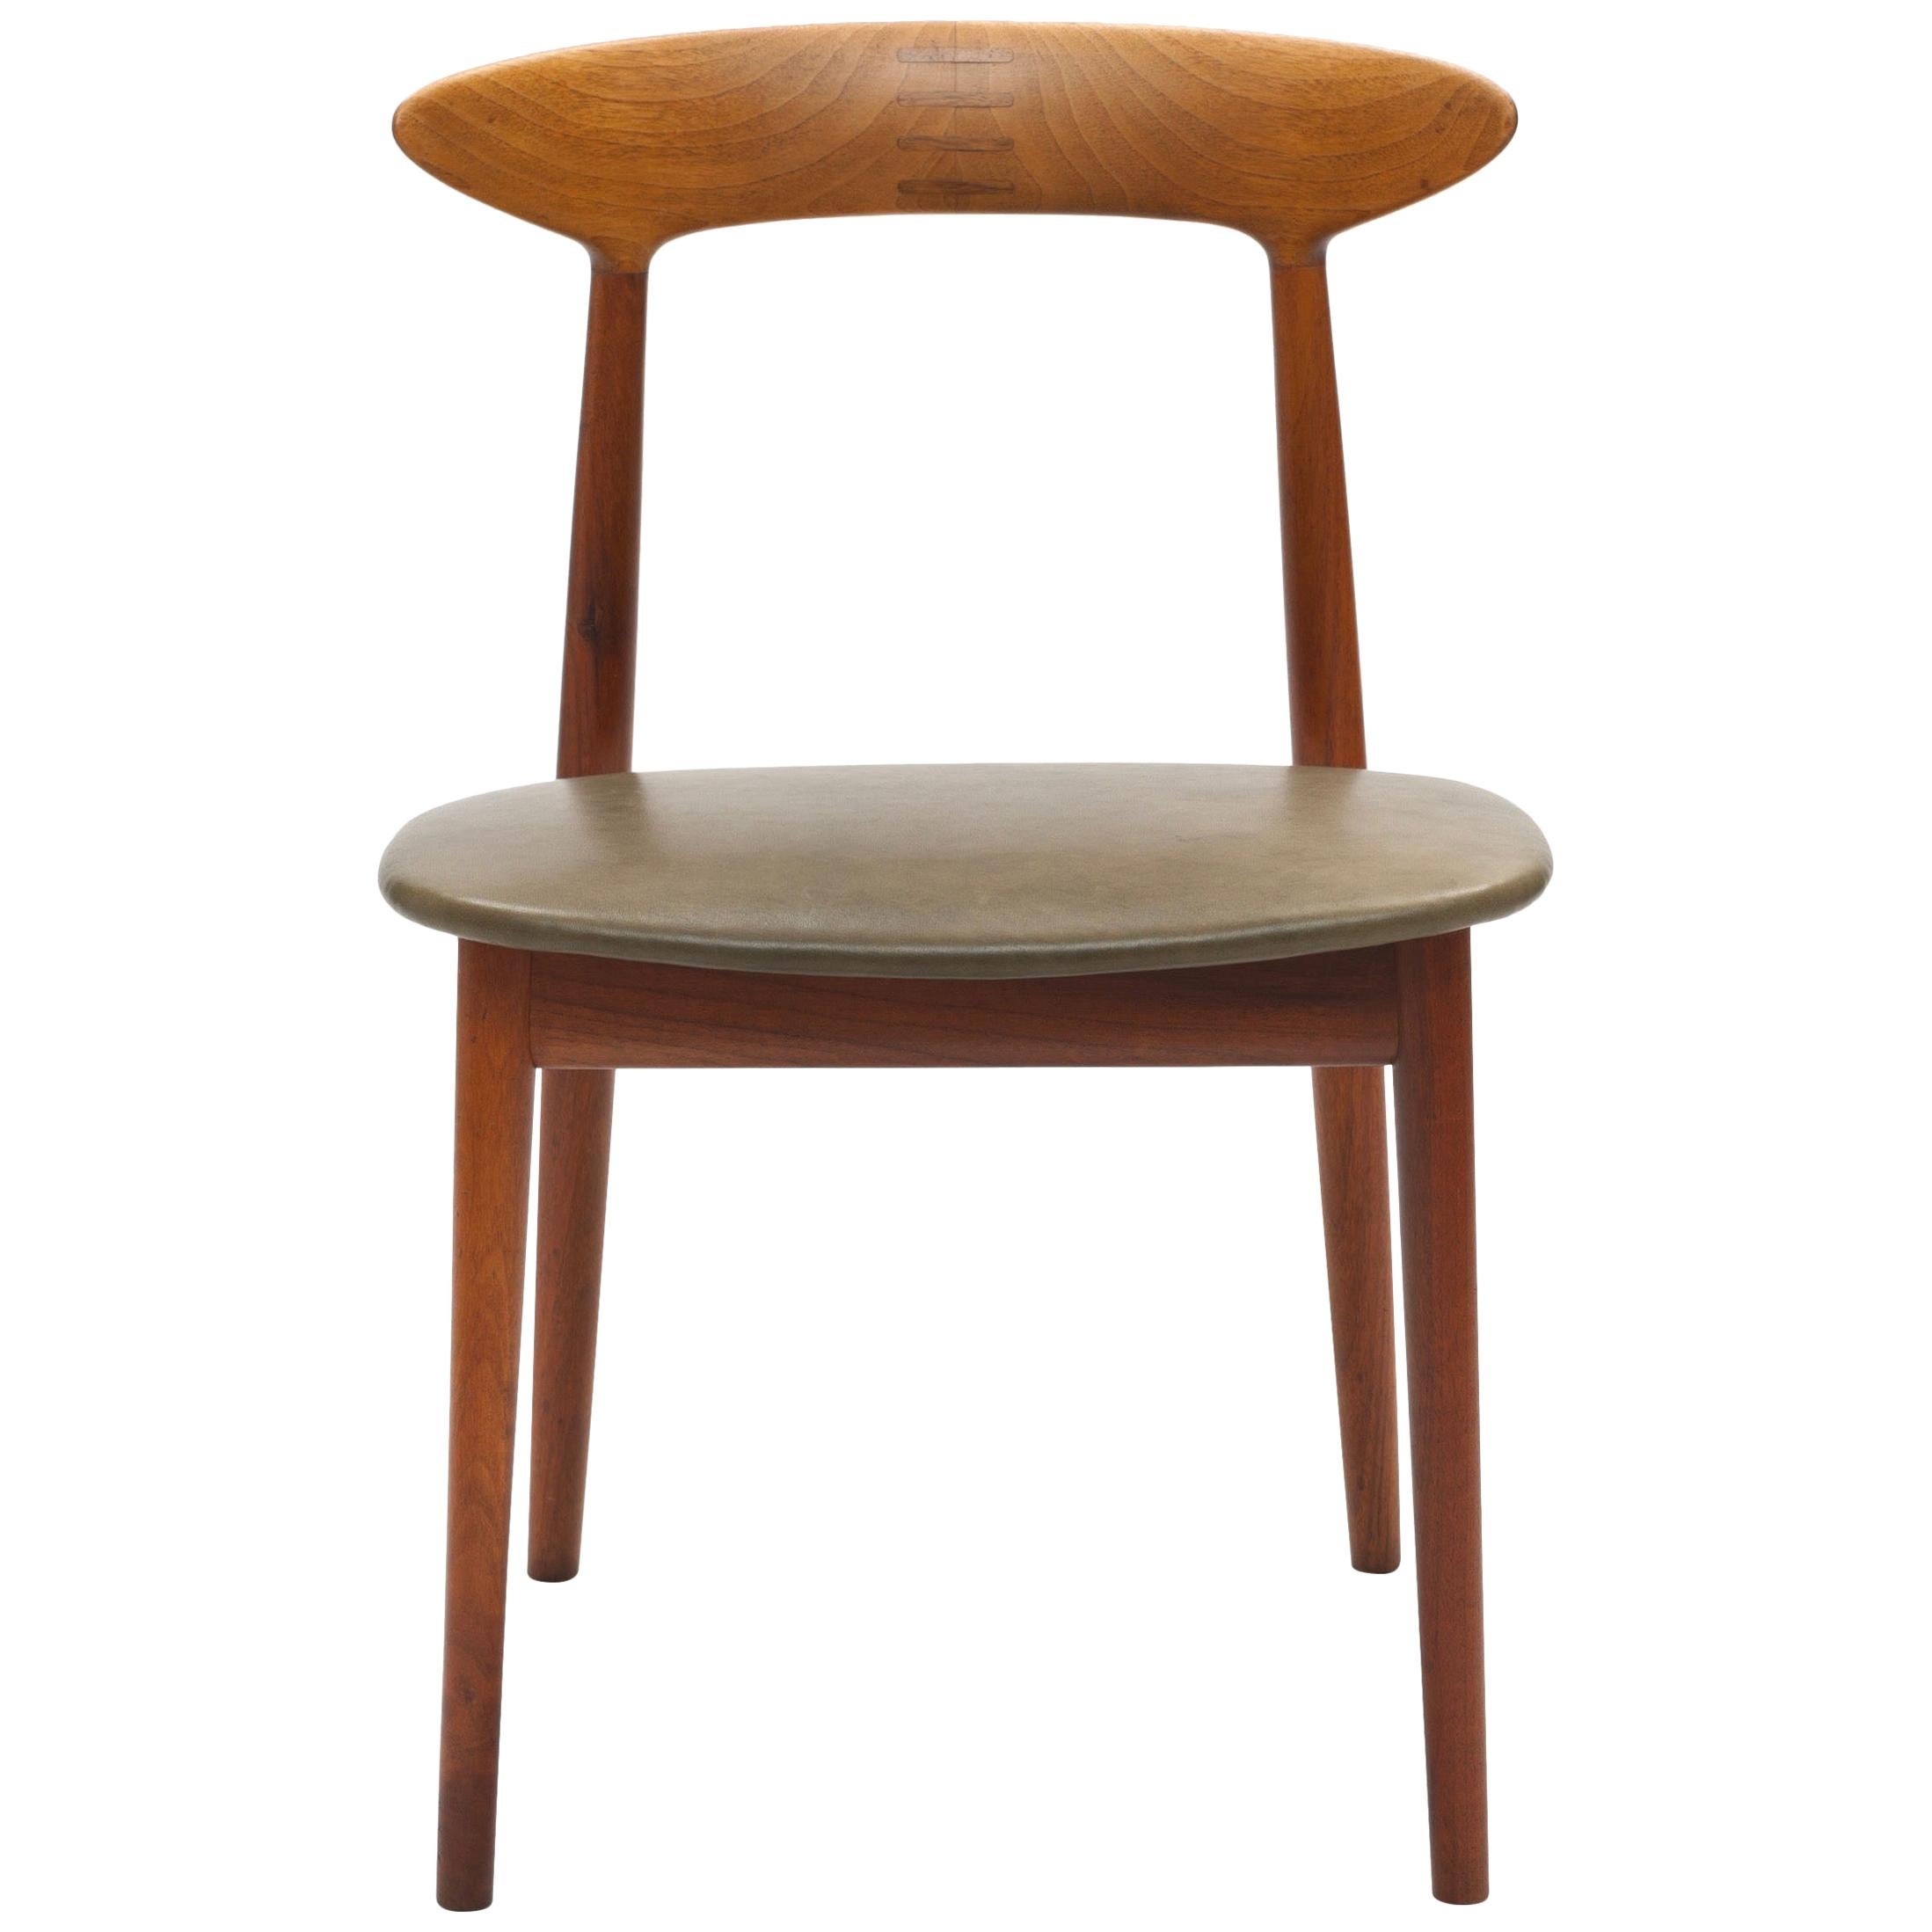 Danish Teak Chair by Kurt Østervig with Wooden Inlay Back Support